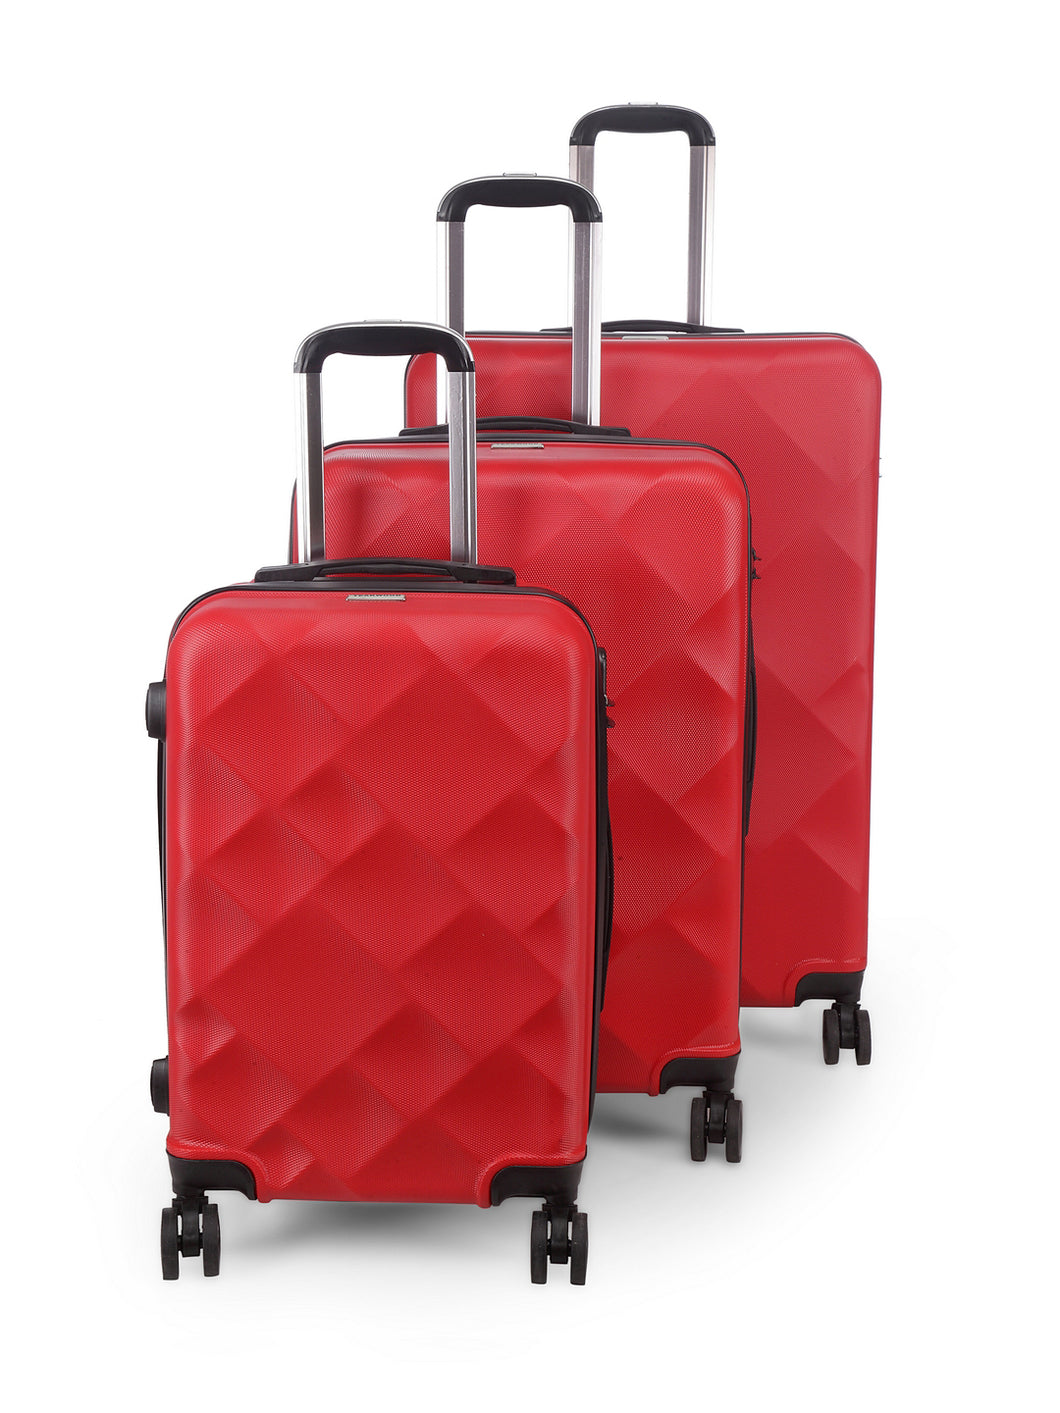 Unisex Red Textured Hard-Sided Set Trolley Suitcase